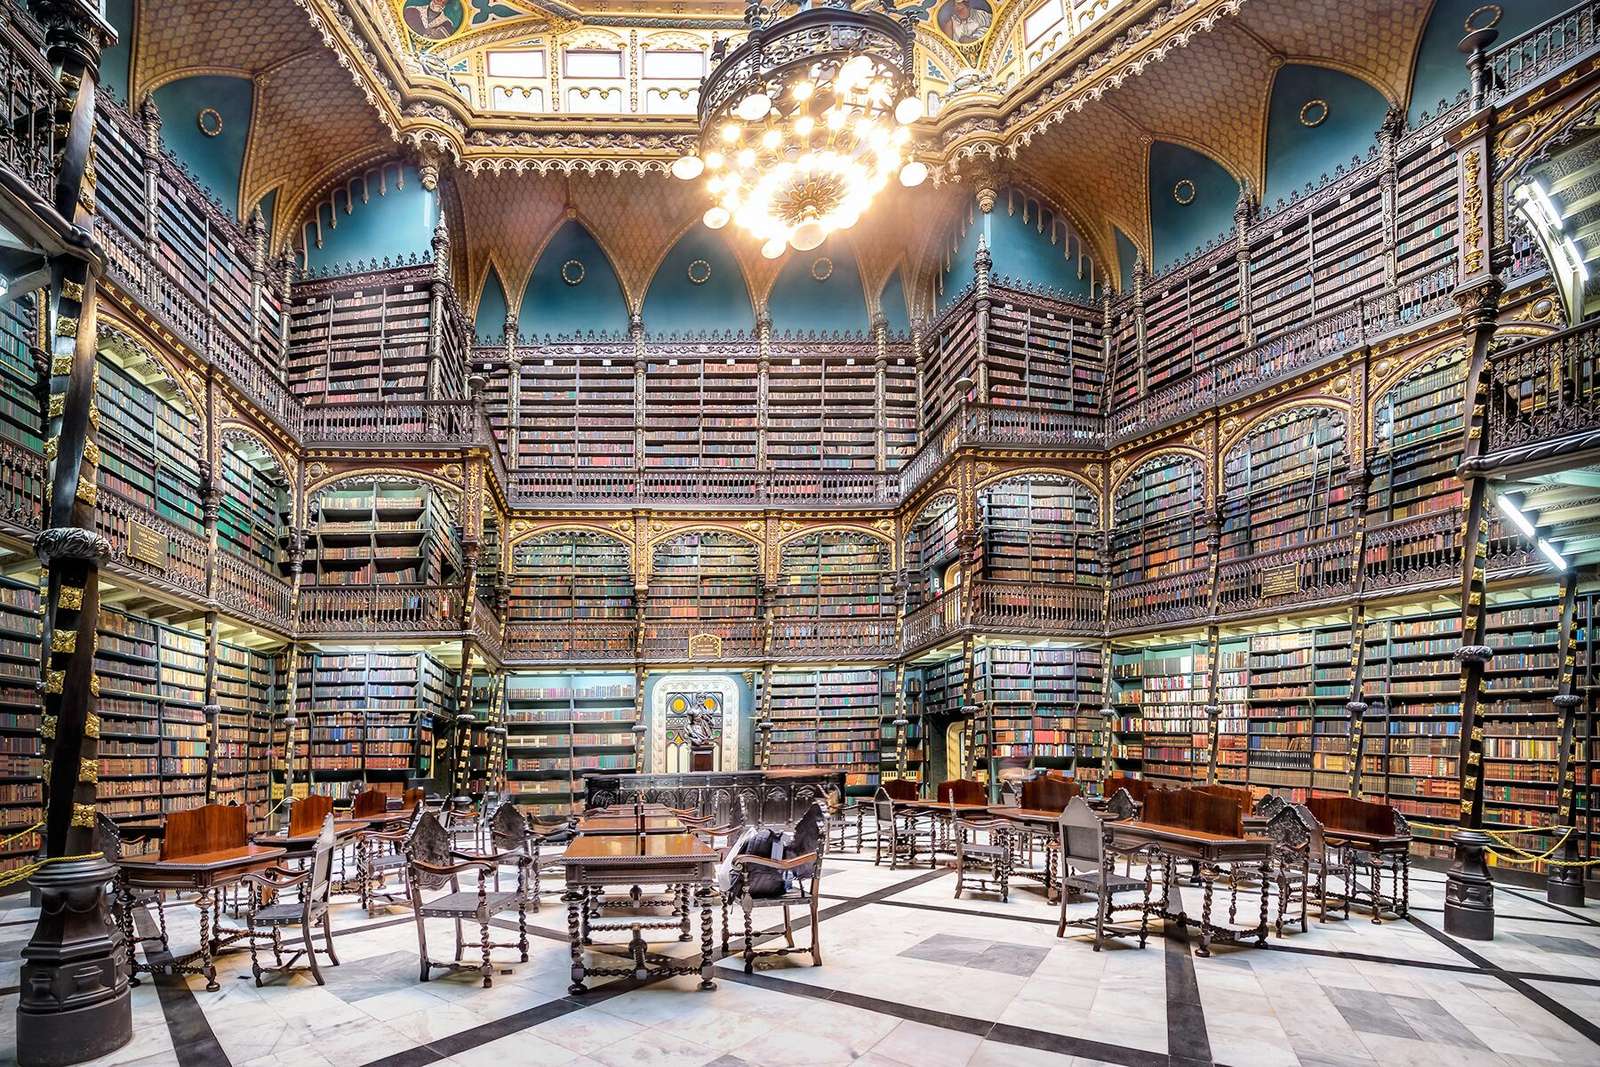 Amazing Libraries 1 puzzle online from photo